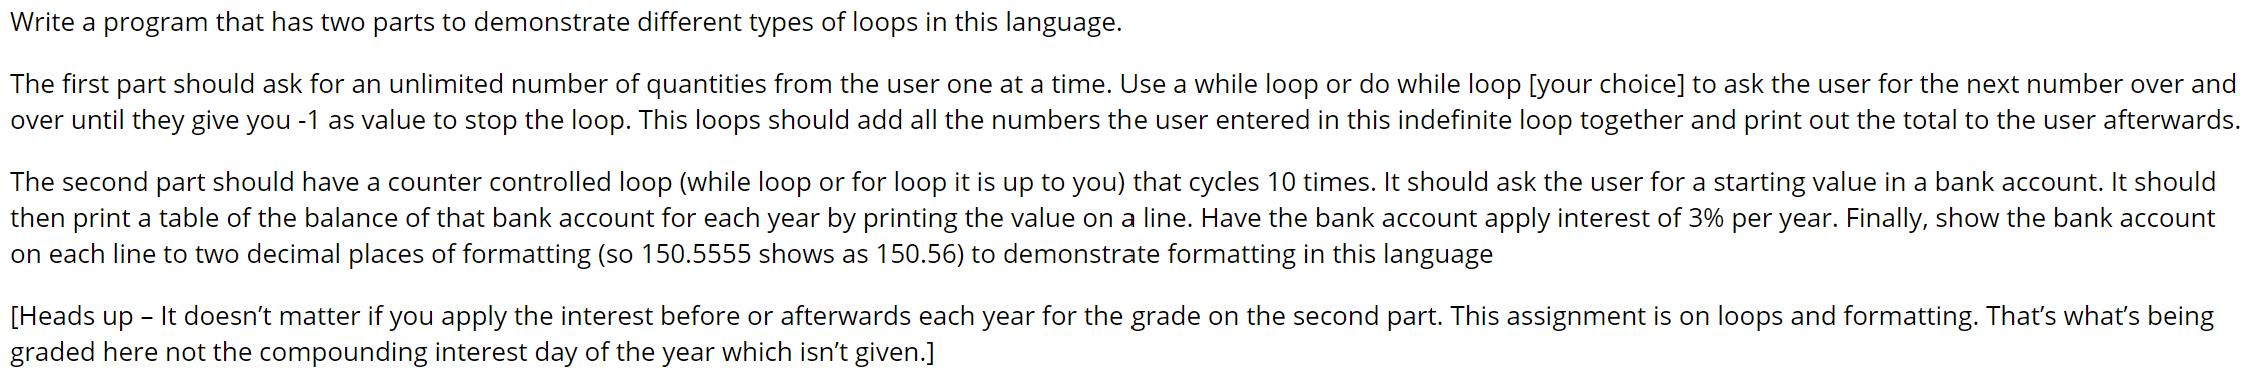 Write a program that has two parts to demonstrate different types of loops in this language. The first part